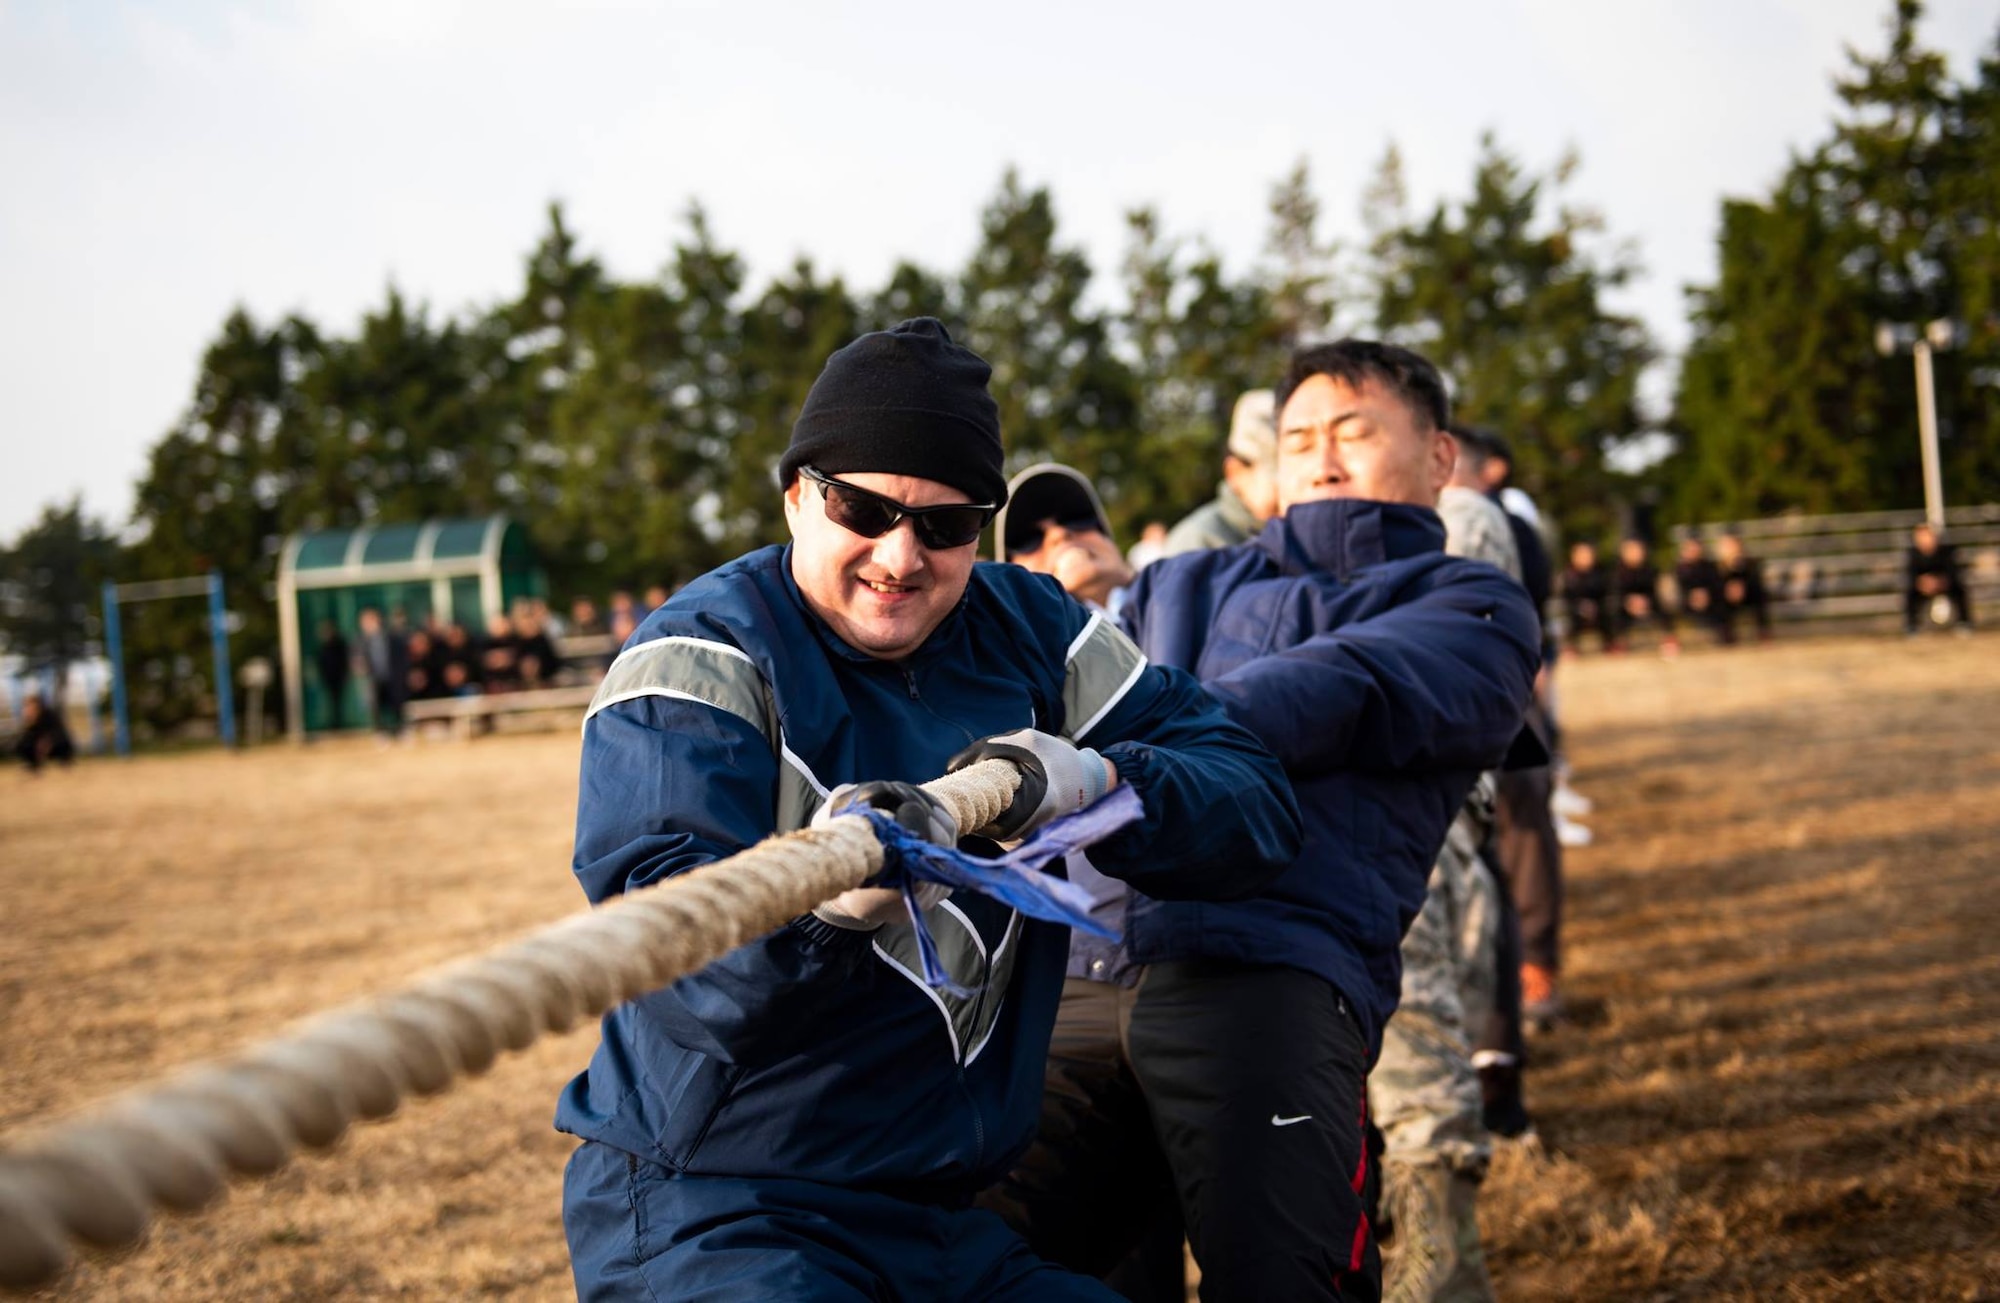 Col. John Bosone, 8th Fighter Wing commander (left), and Col. Jae-Gyun Jeon, 38th Fighter Group commander (right), pull a rope in a game of tug-of-war at Kunsan Air Base, Republic of Korea, Nov. 9, 2018. Participants in the 2018 US-ROKAF Friendship Day competed in a variety of sports and interactive events, such as basketball, volleyball, the video game “League of Legends”, golf, bowling, and soccer. (U.S. Air Force photo by Senior Airman Stefan Alvarez